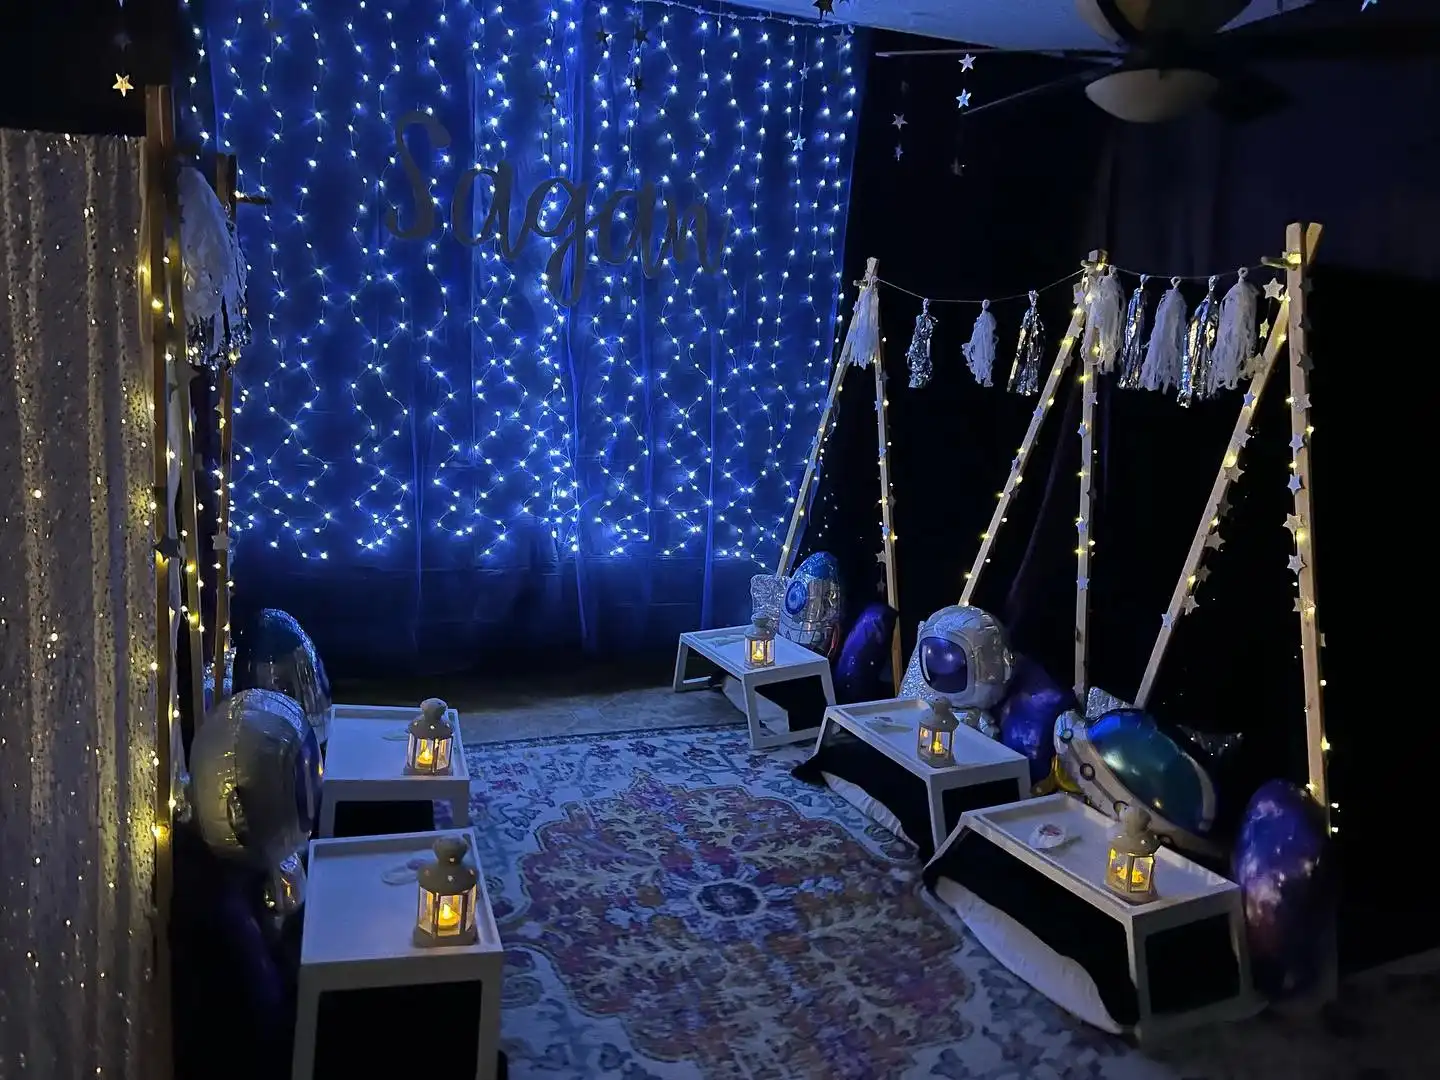 A party room adorned with blue lights and candles for a glamping experience.